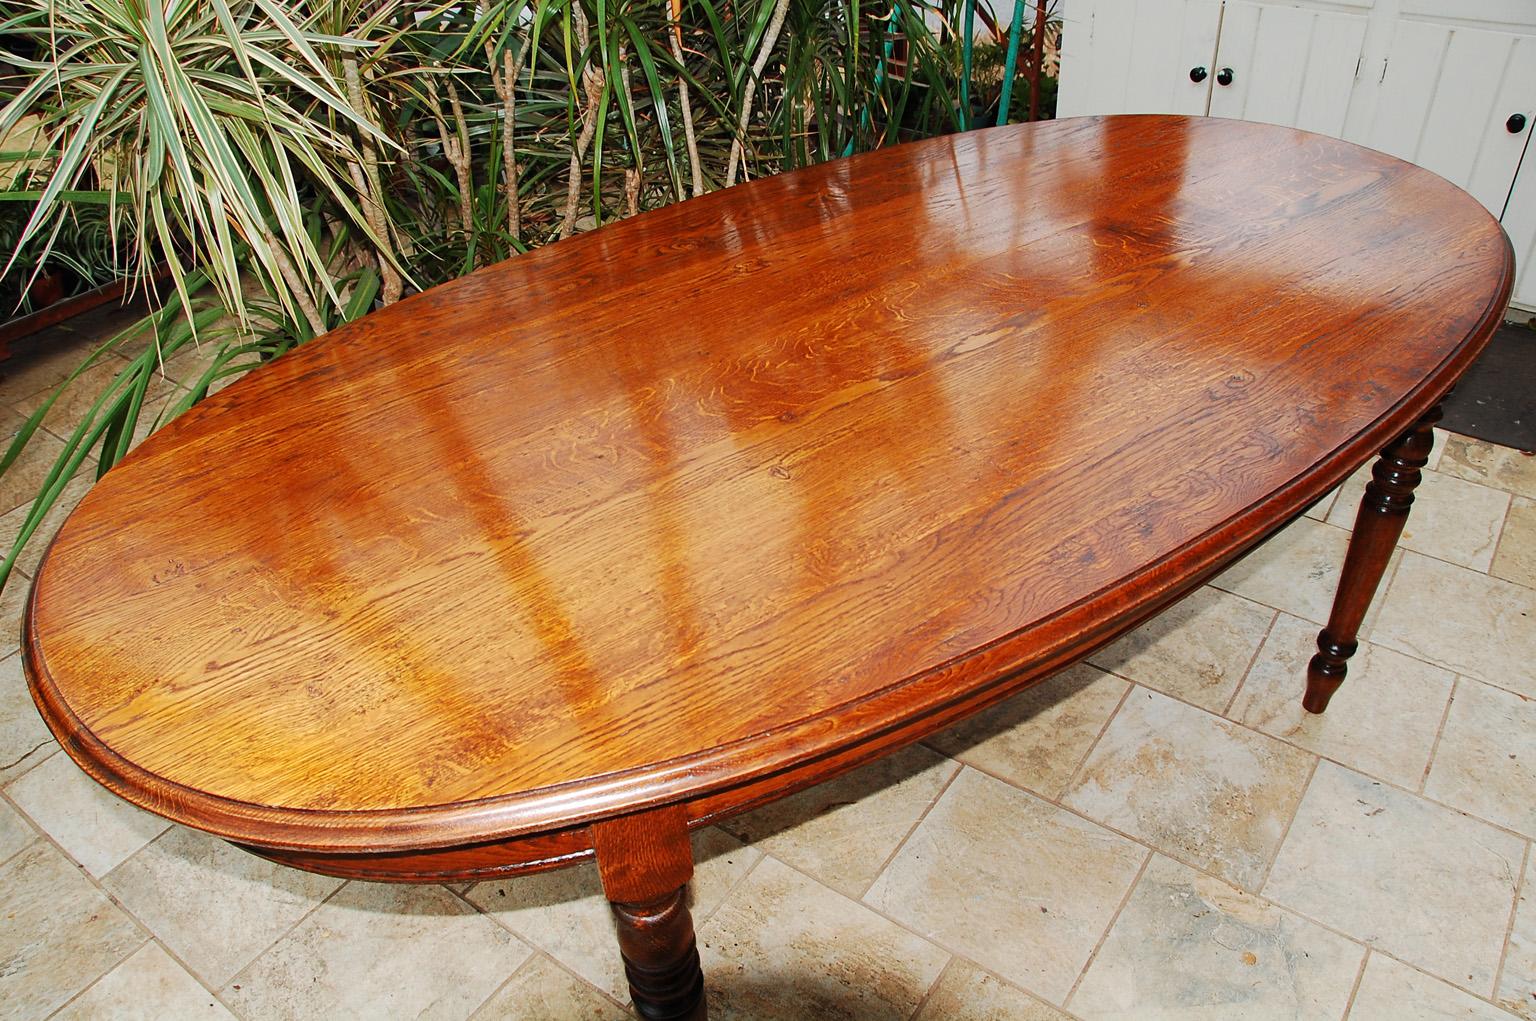 French Provincial oak oval dining table with turned legs and molded top. This elegantly shaped country table has been refinished with classic french polish techniques and is ready to be used and enjoyed. The top was removed and attached using a